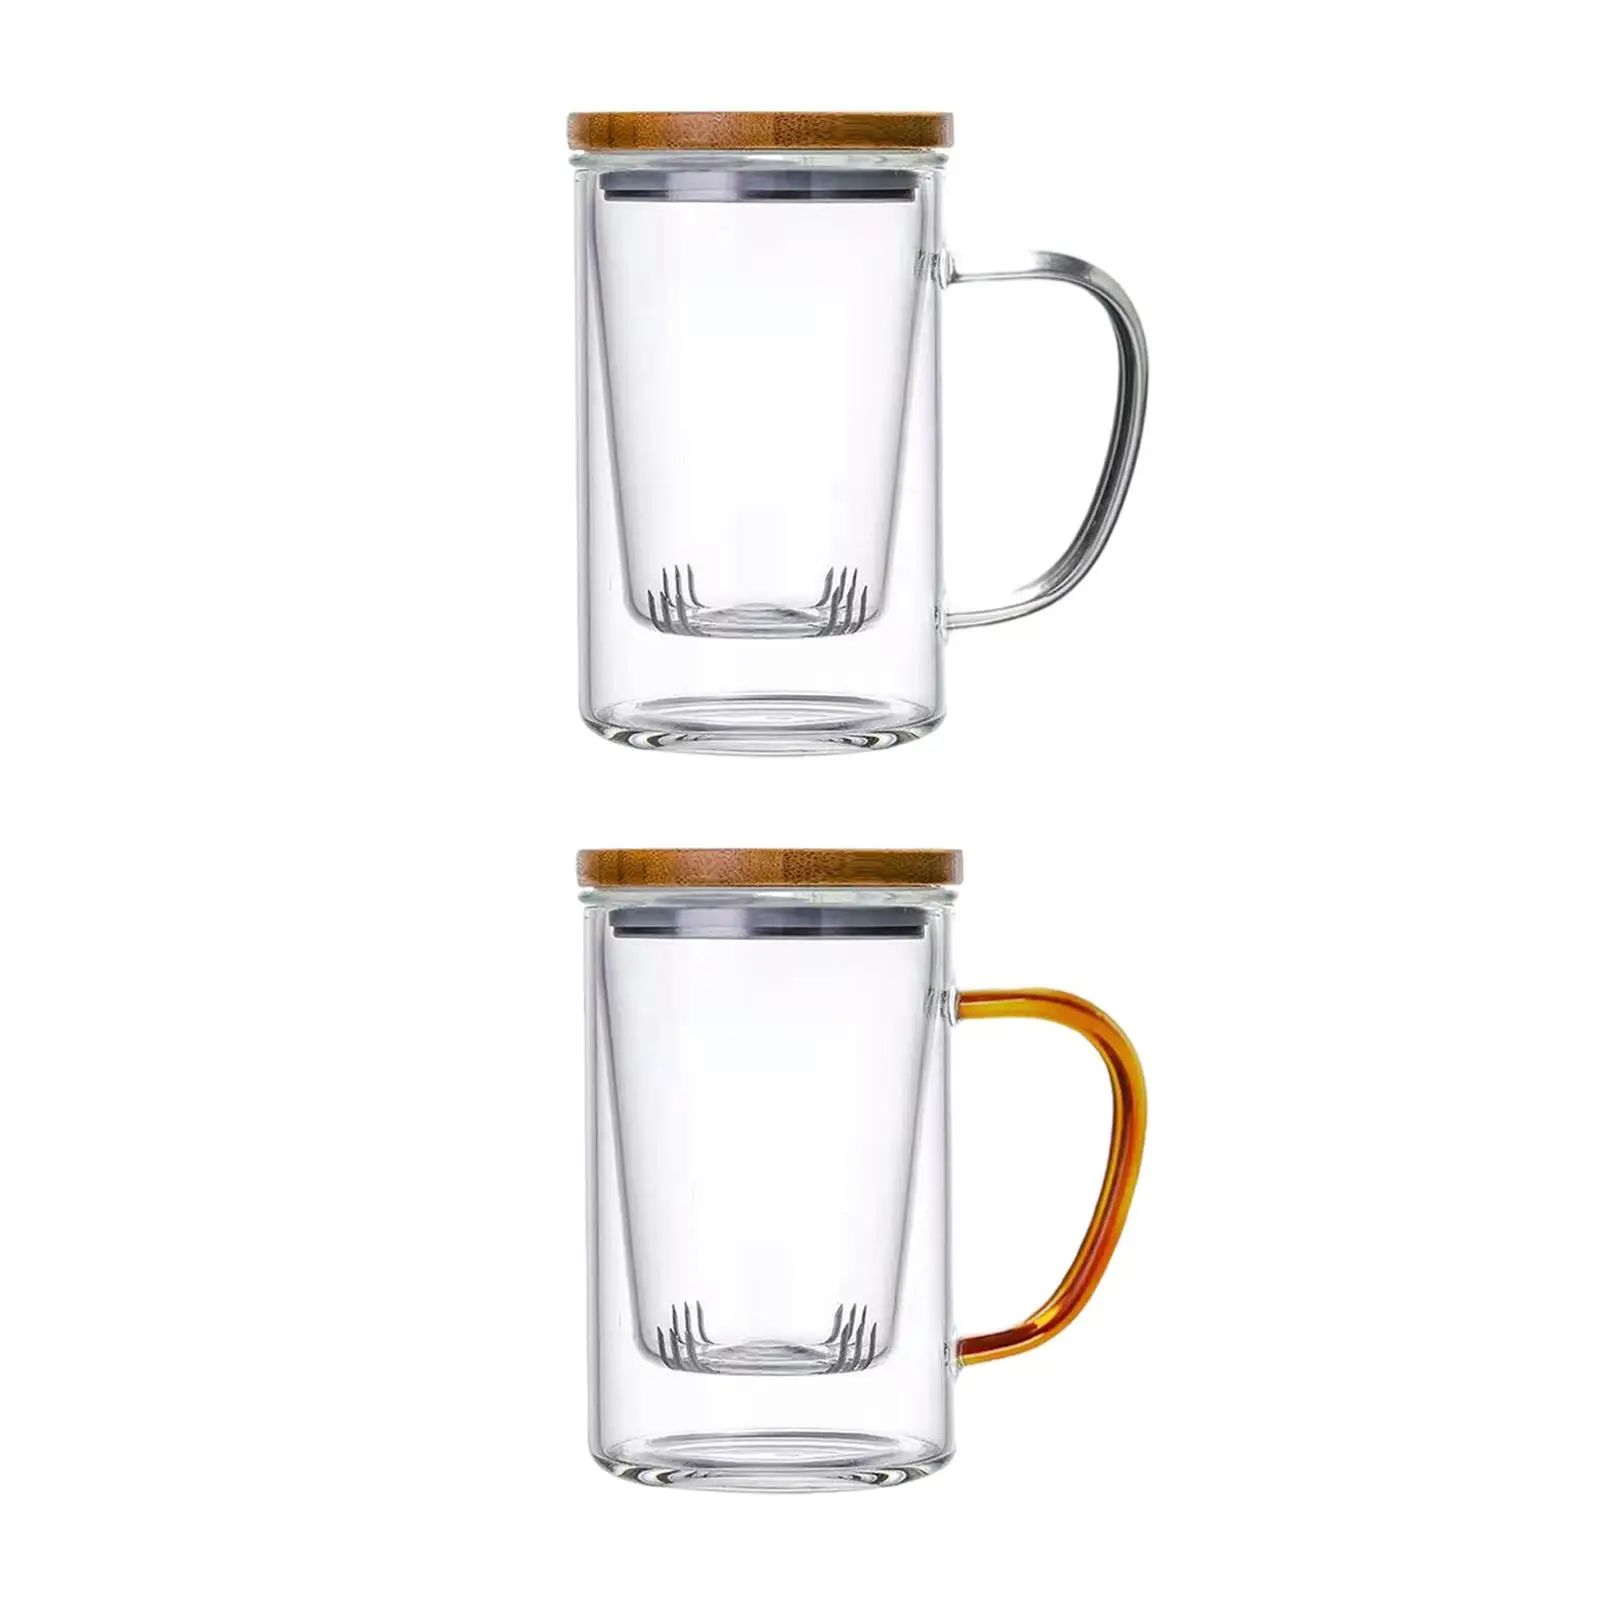 Glass Tea Infuser Double Wall with Strainer and Lid Clear Drinking Cup 400ml Filtration Teacups for Hot and Cold Blooming Tea